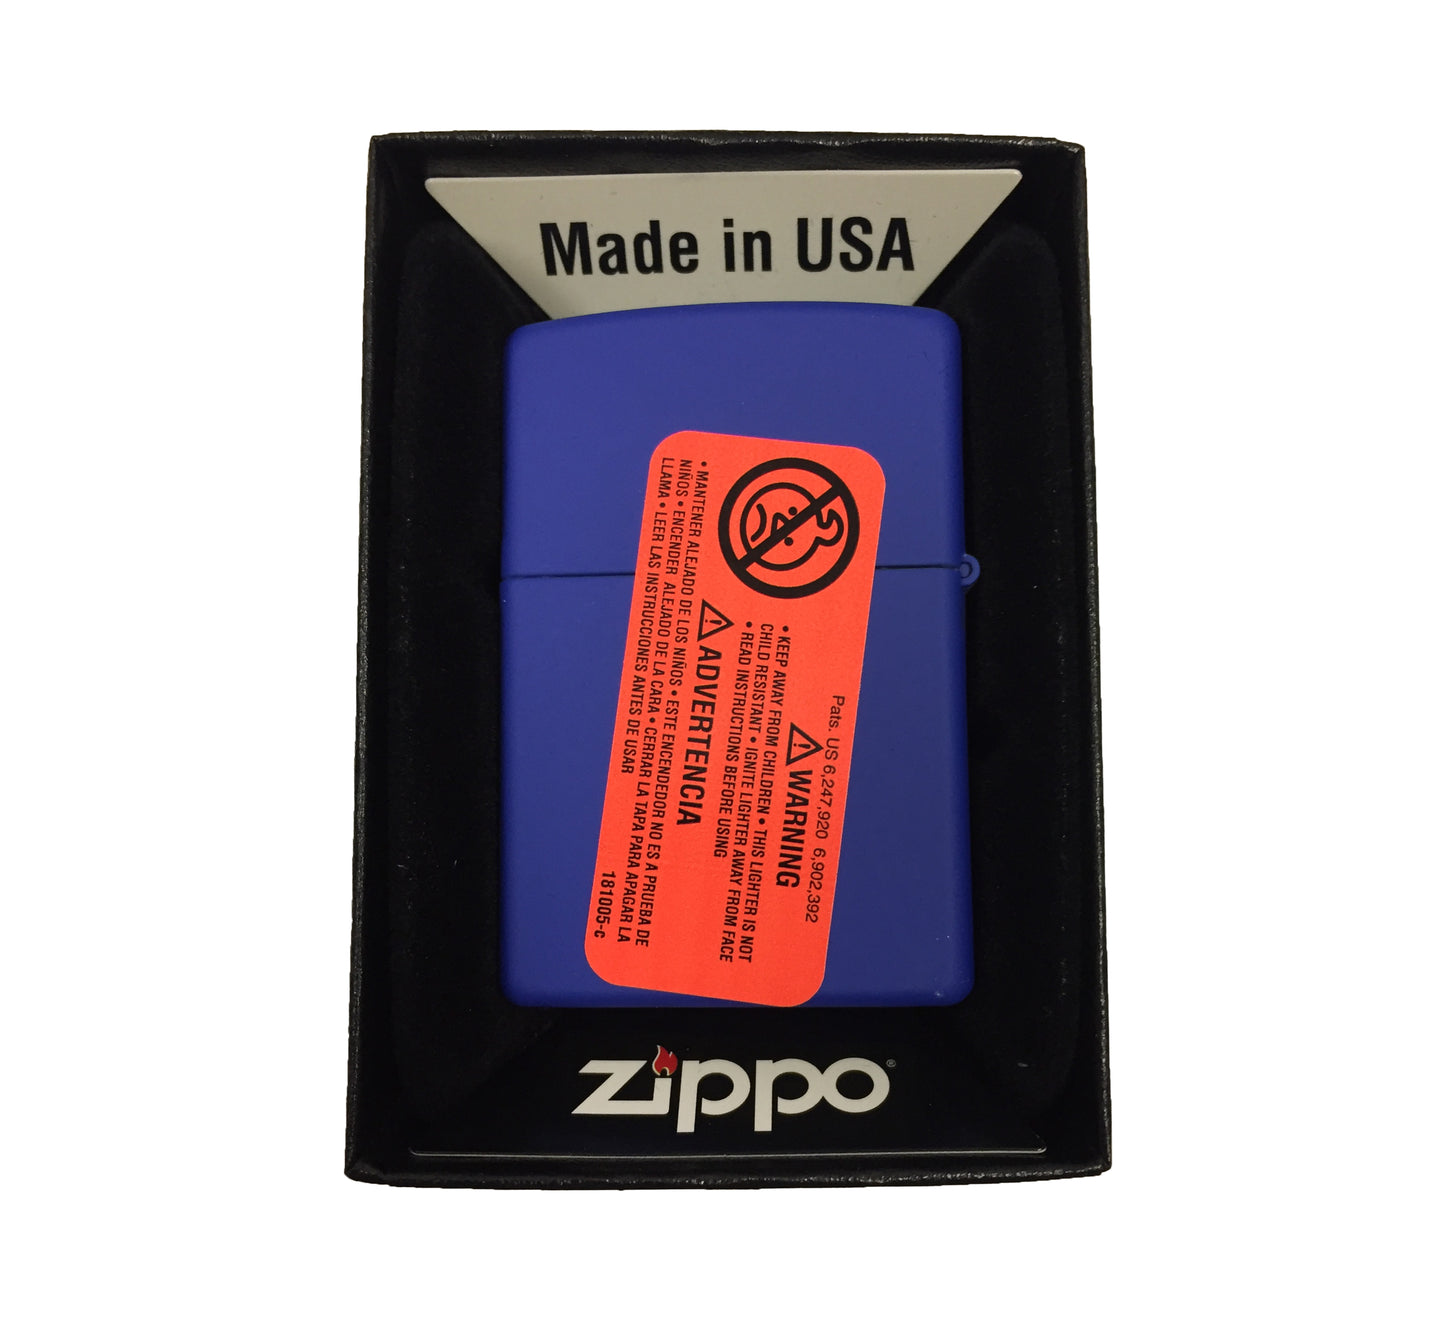 Poseidon with the Sea in His Hair - Royal Blue Matte Zippo Lighter